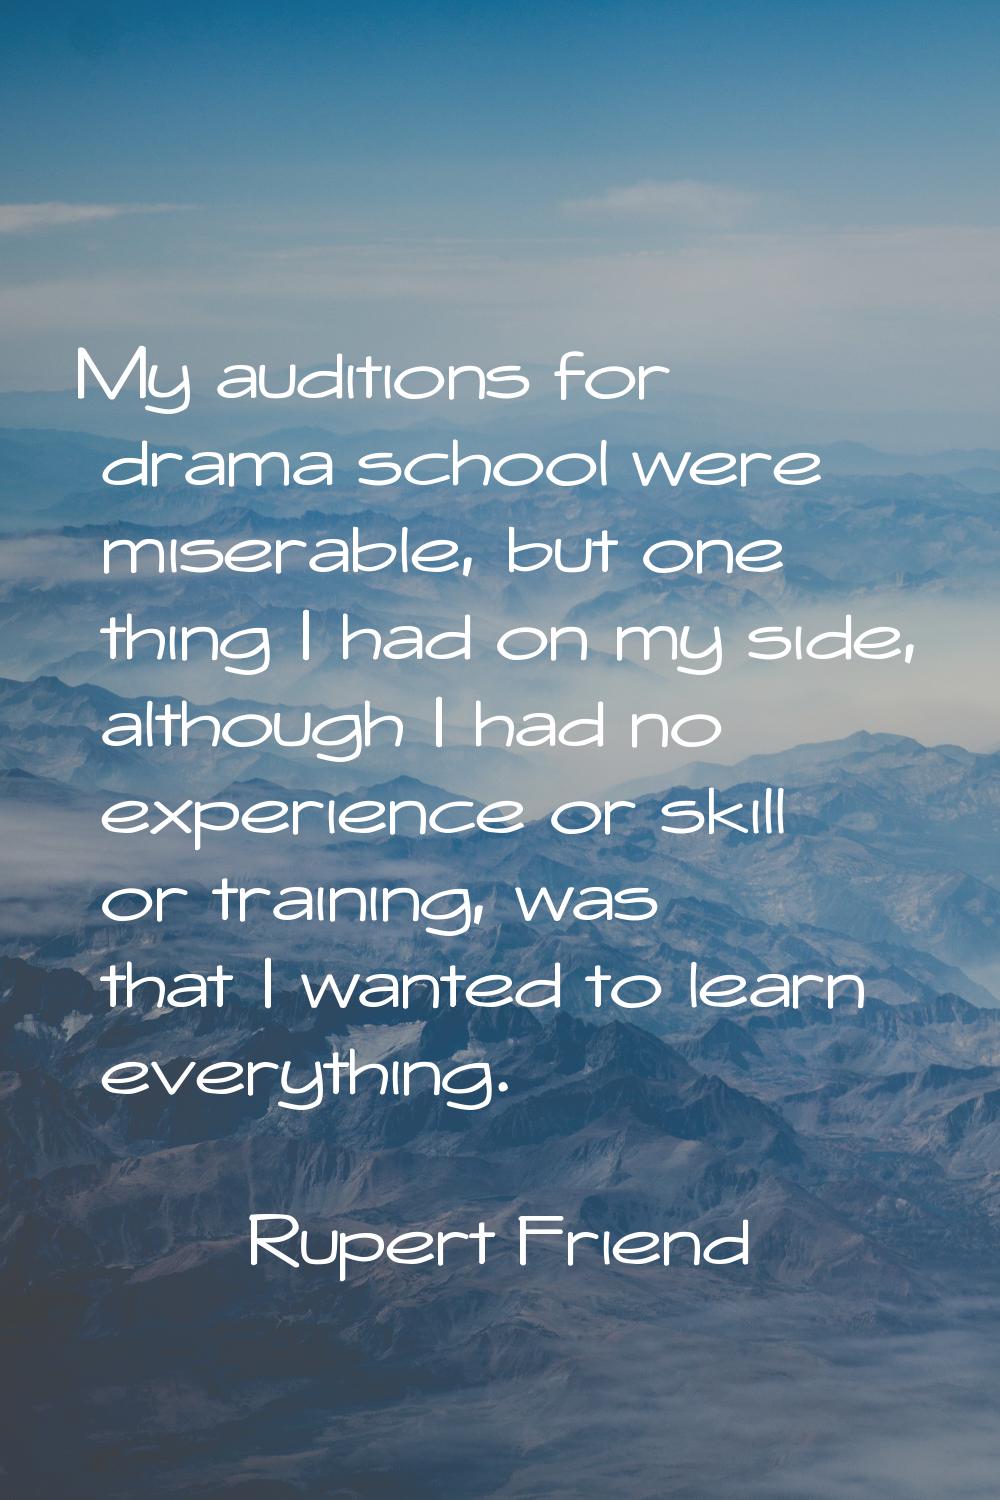 My auditions for drama school were miserable, but one thing I had on my side, although I had no exp